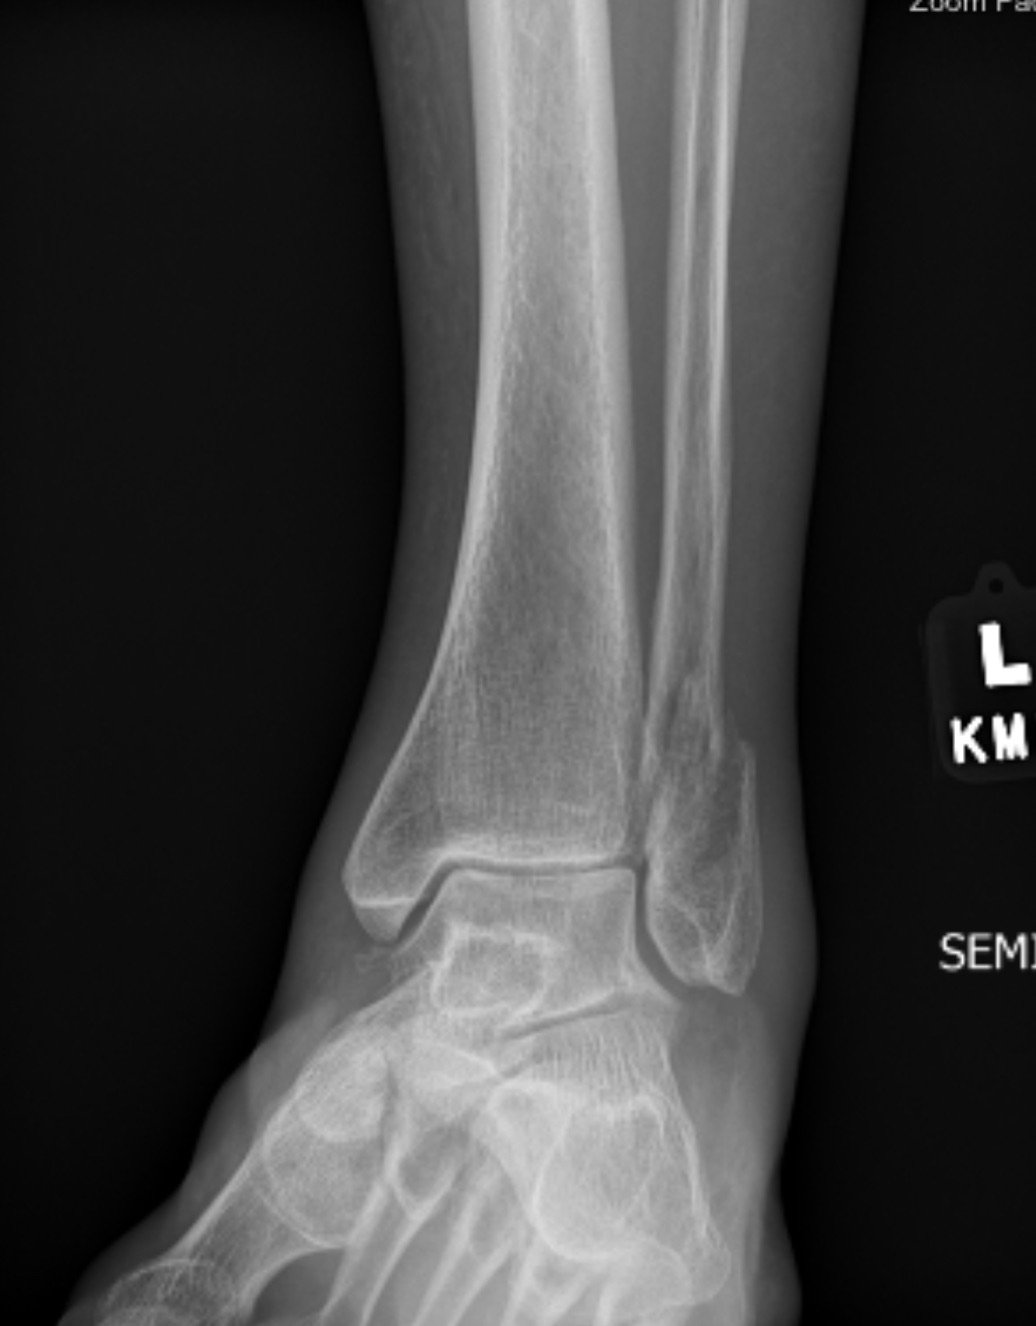 Ankle fracture — Tonya An, MD